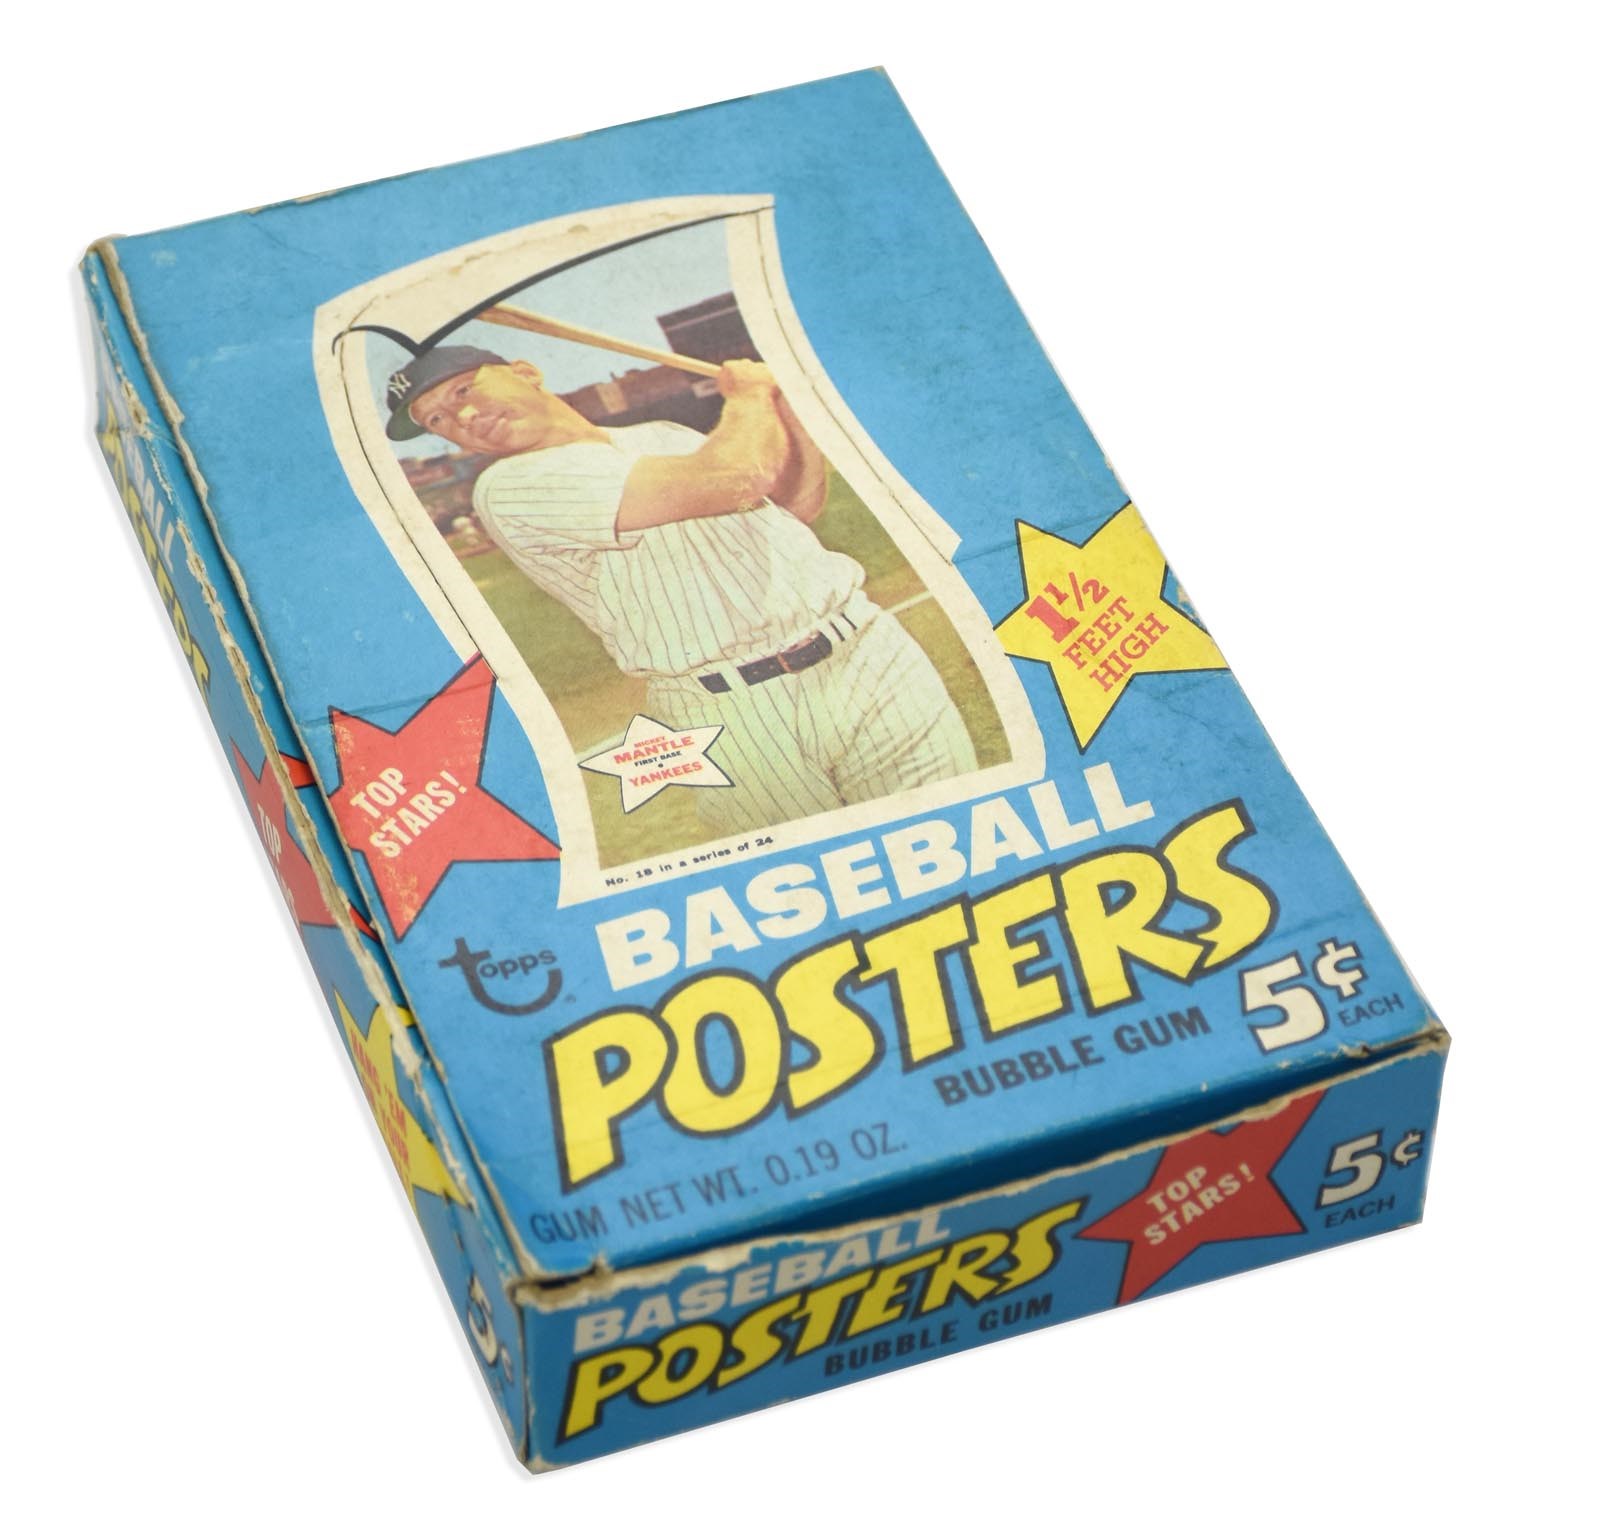 Baseball and Trading Cards - 1967 Topps Baseball Posters Wax Box with Mickey Mantle